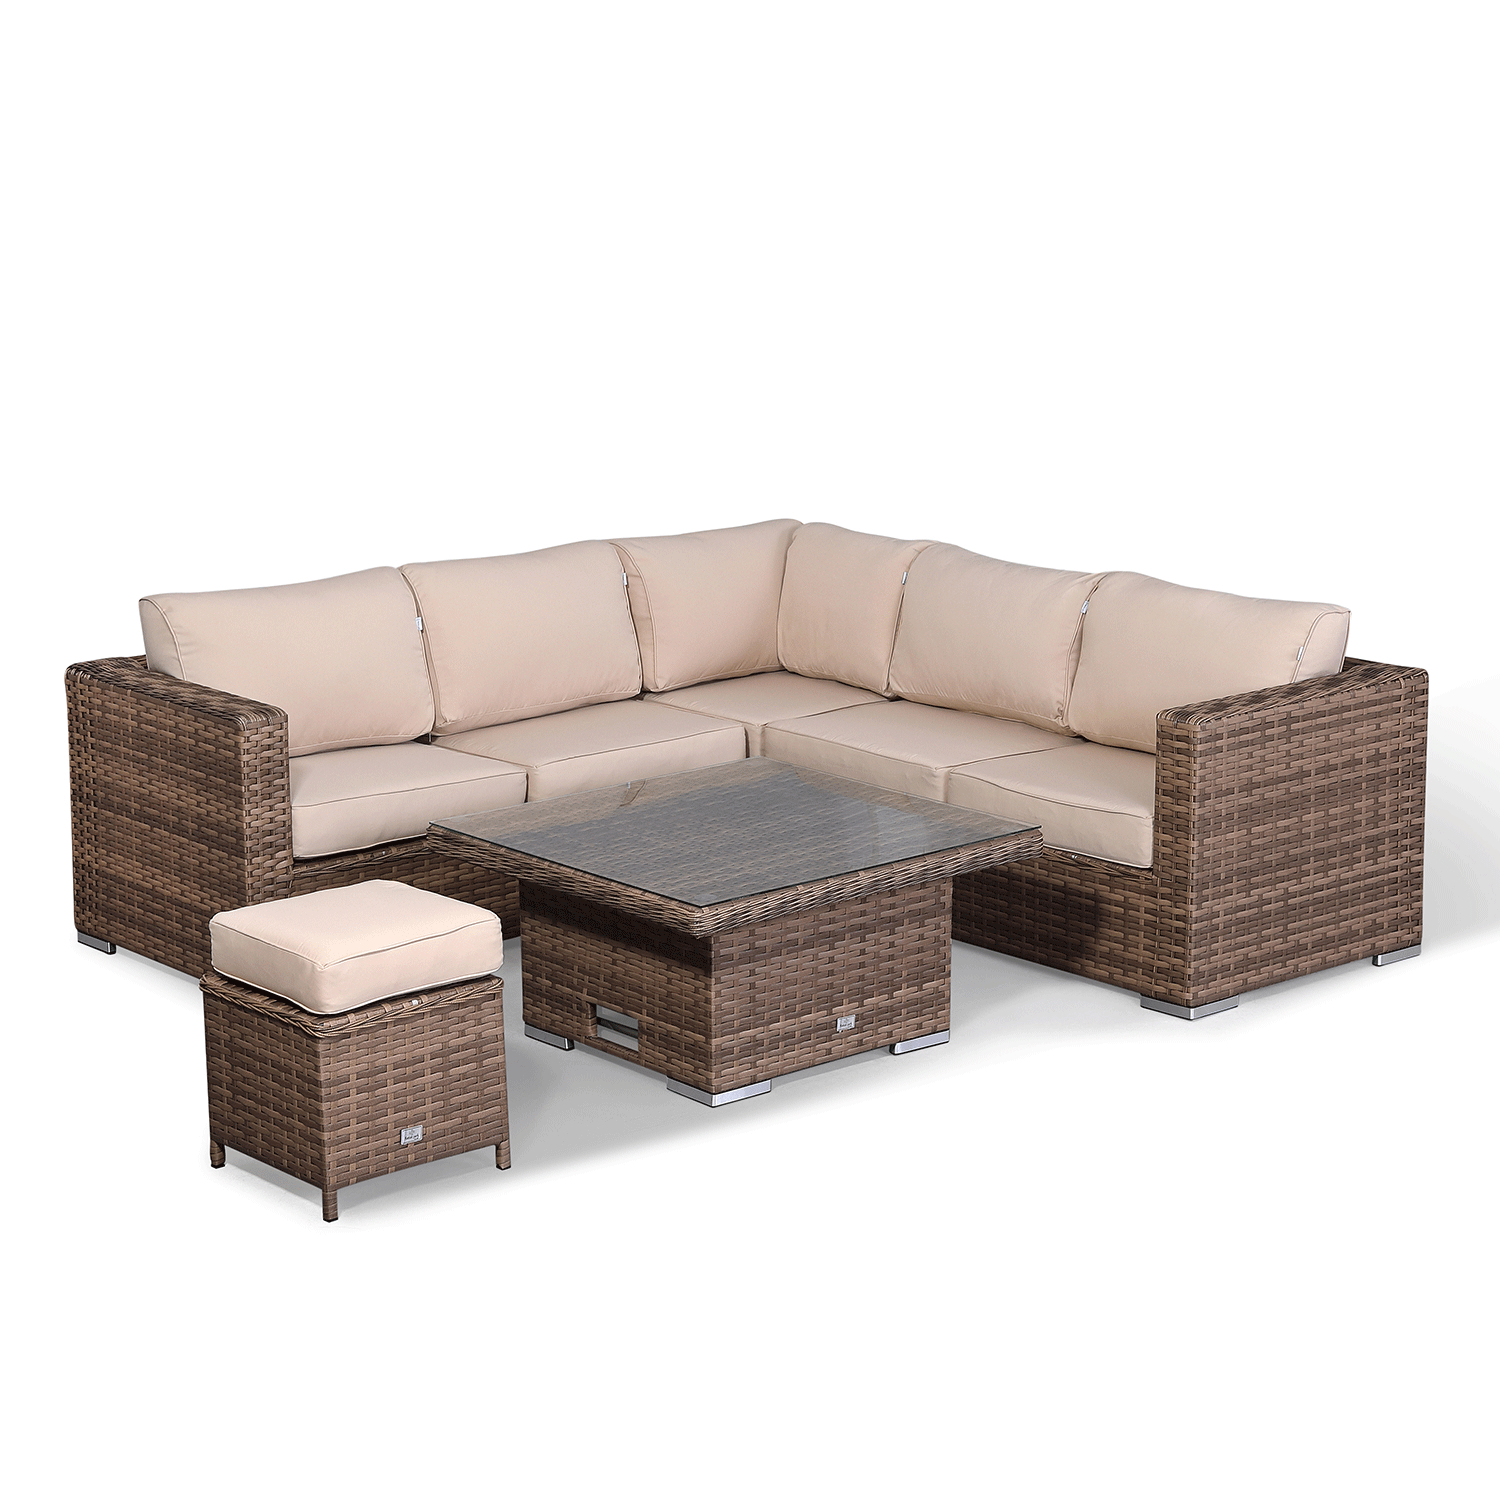 Durley Range Square Corner Sofa Set with Rising Table in Brown weave